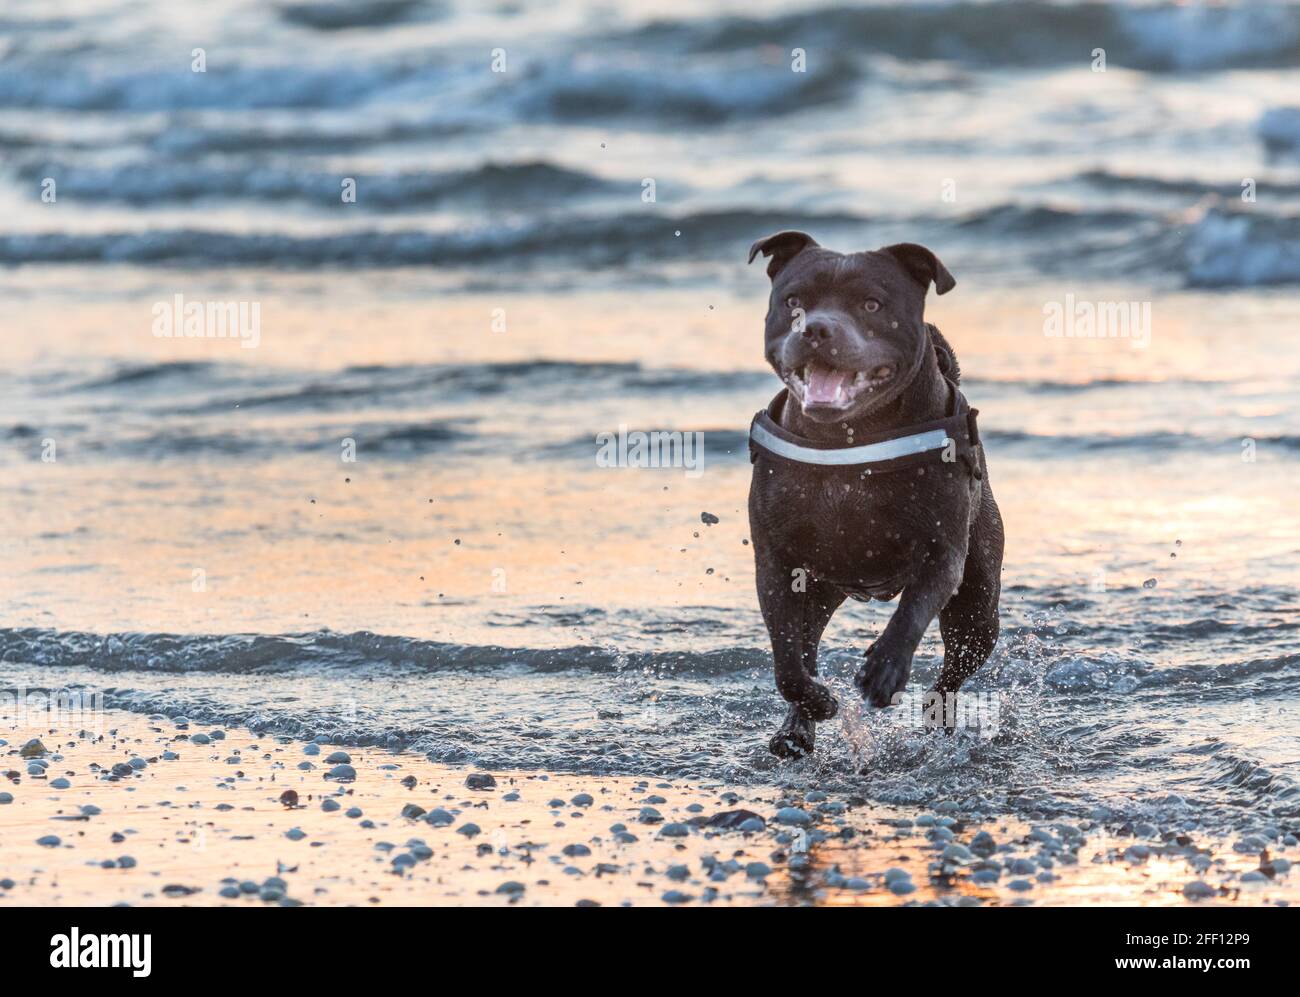 Ringaskiddy, Cork, Ireland. 24th Apr, 2021. Robbie a Blue Staffordshire Bull Terrier playing on a beach at dawn in Ringaskiddy, Co. Cork, Ireland.- Credit; Credit: David Creedon/Alamy Live News Stock Photo